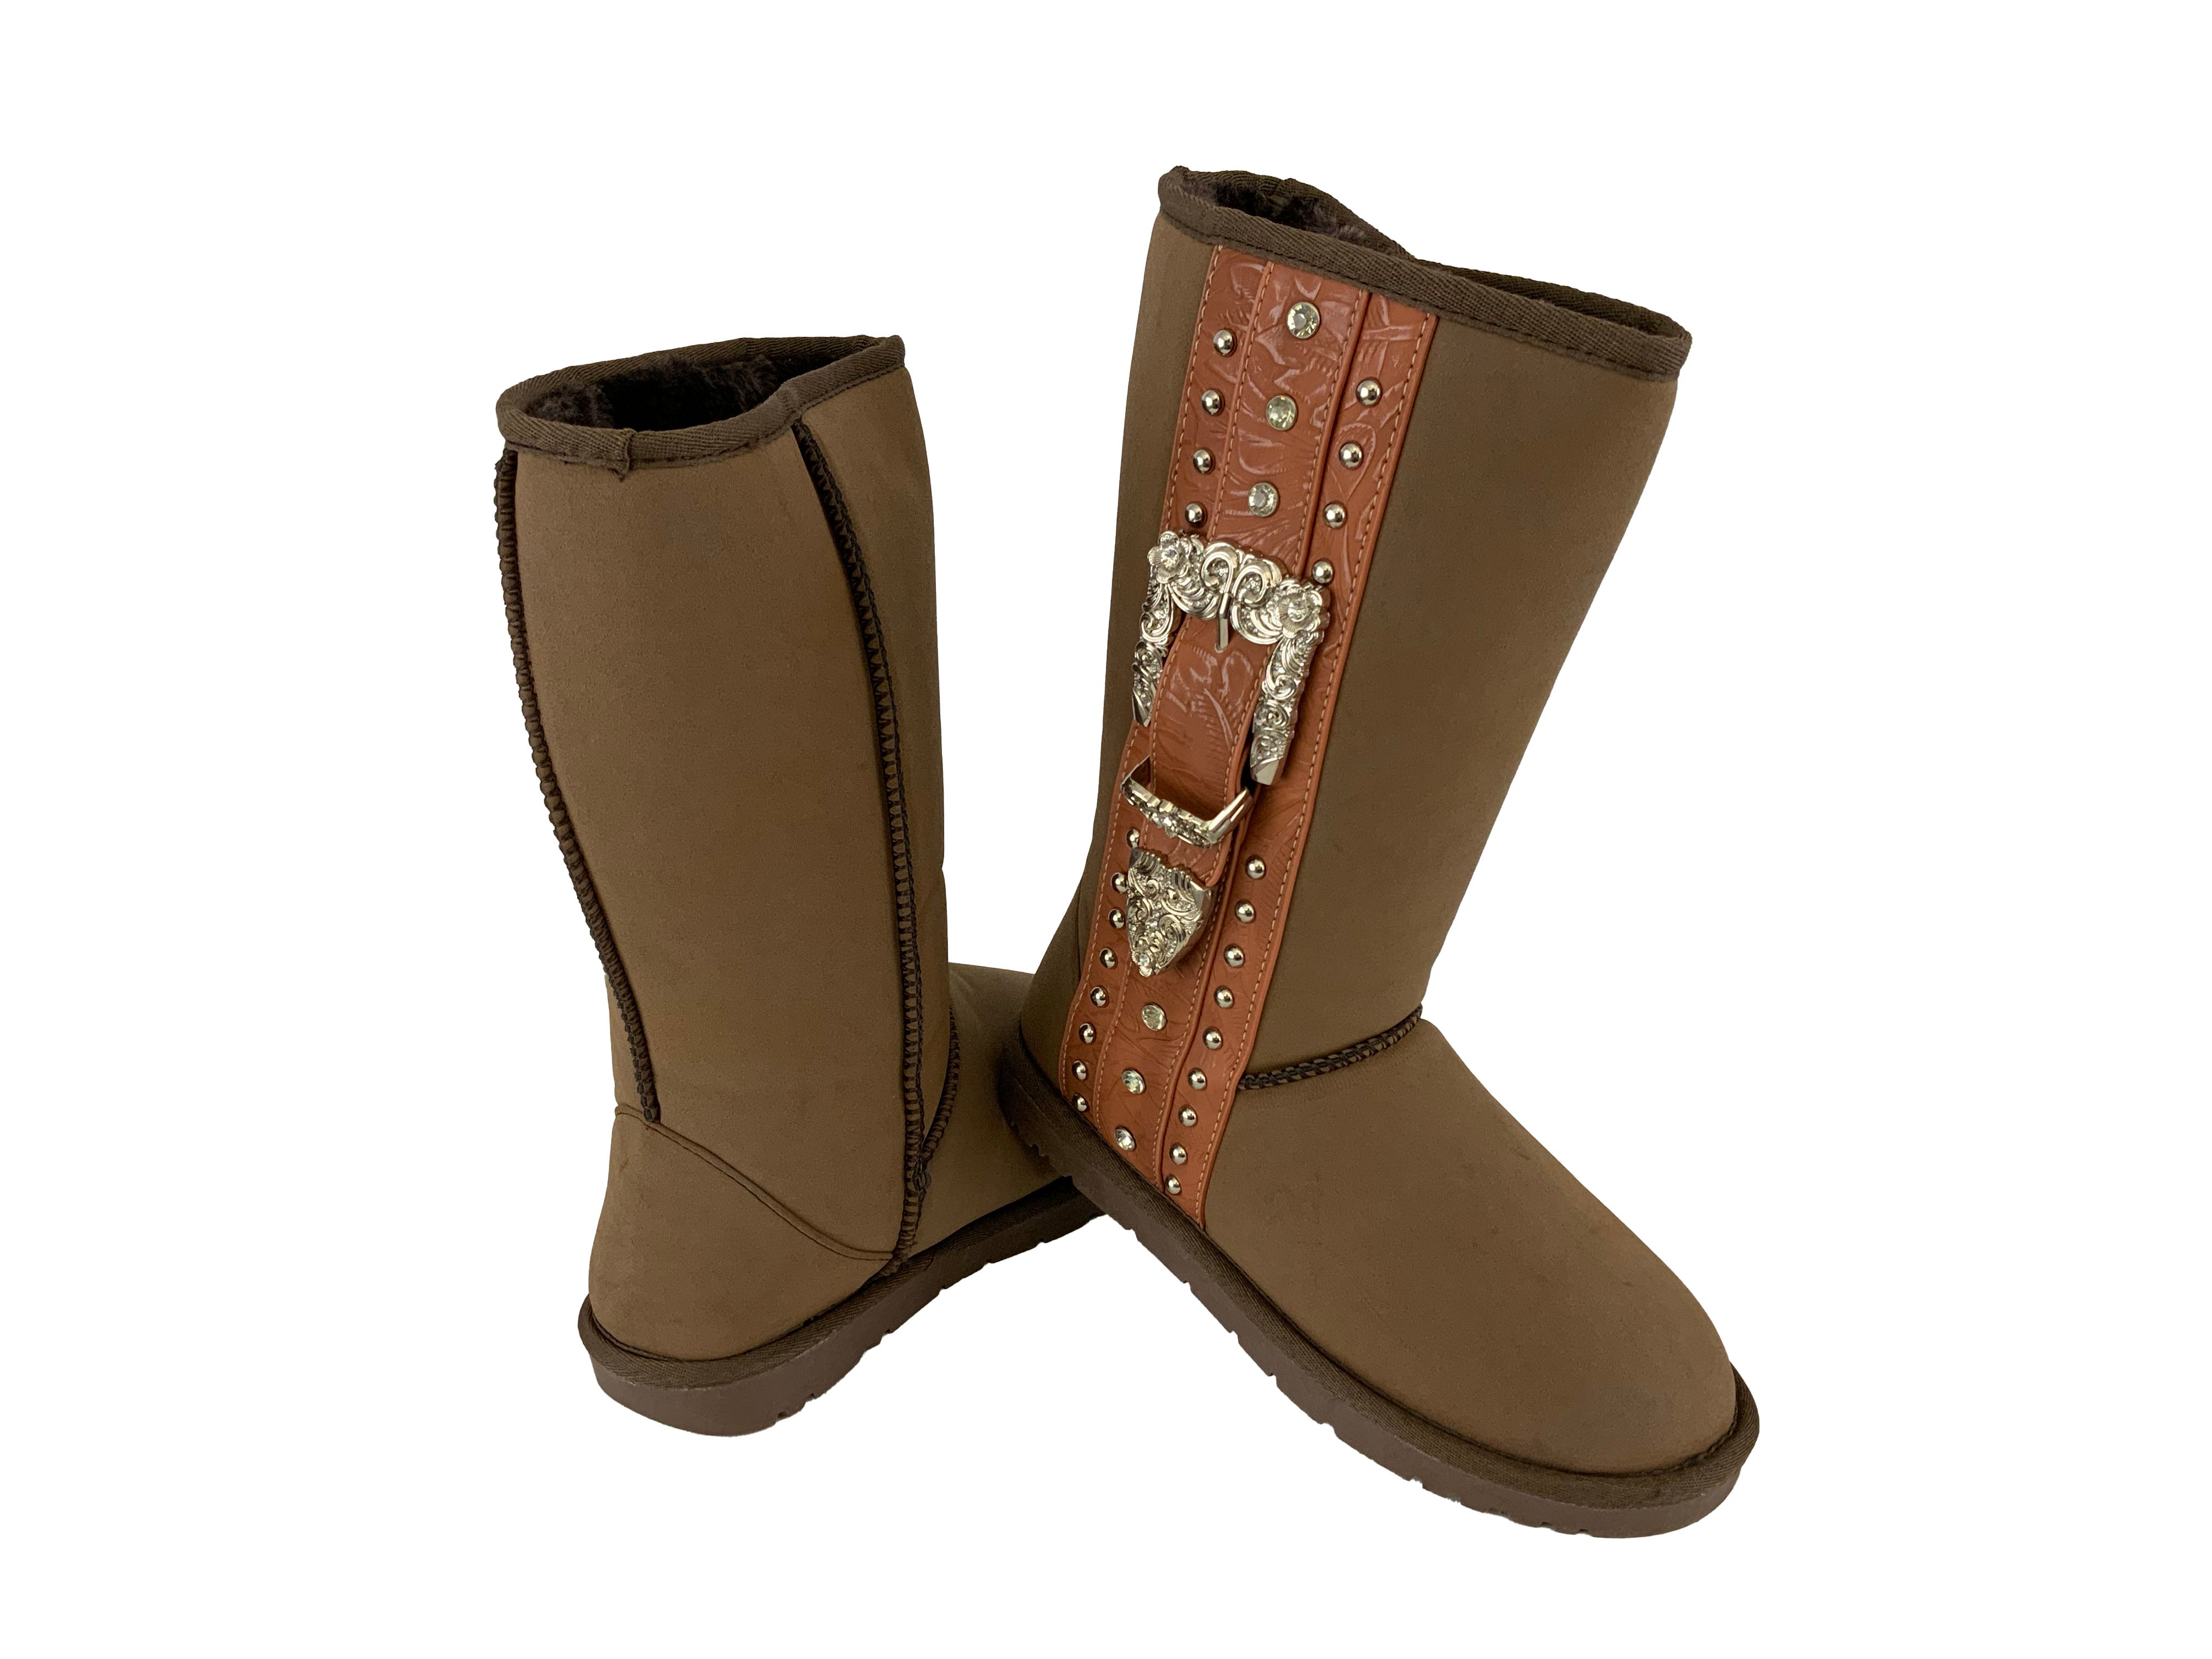 BA3339-C: Mocha suede tall boot with buckle and leather strip Primary Showman Saddles and Tack   